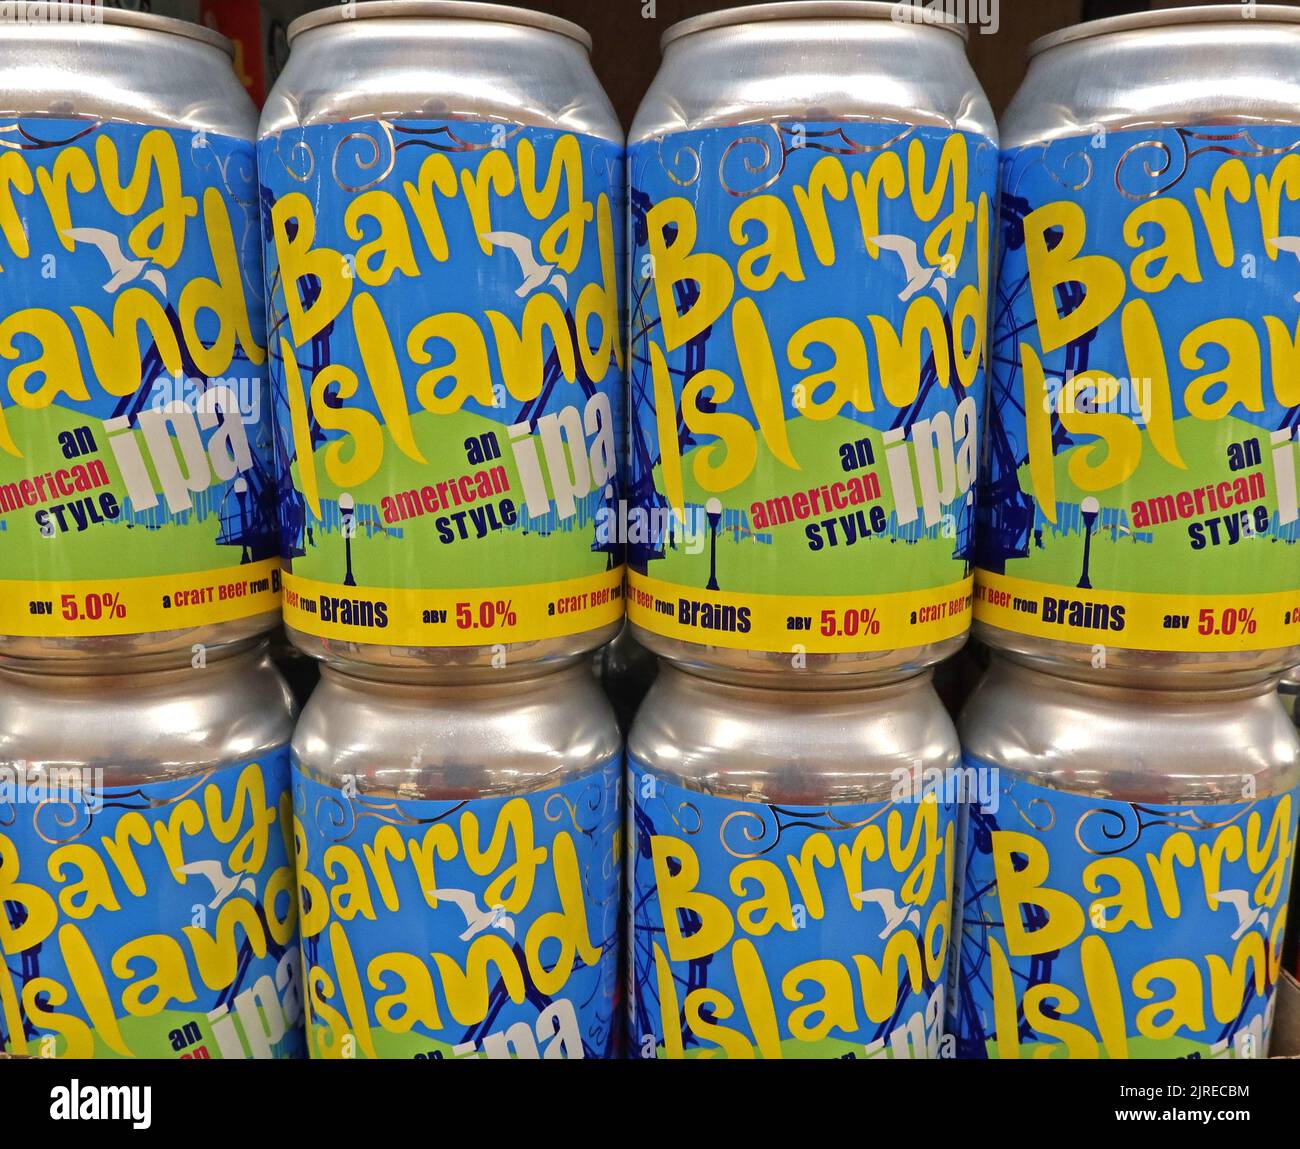 Cans of Barry Island, Fresh , Hoppy, Tidy, American Style IPA, craft beer from Brains Dragon brewery. 5% Stock Photo